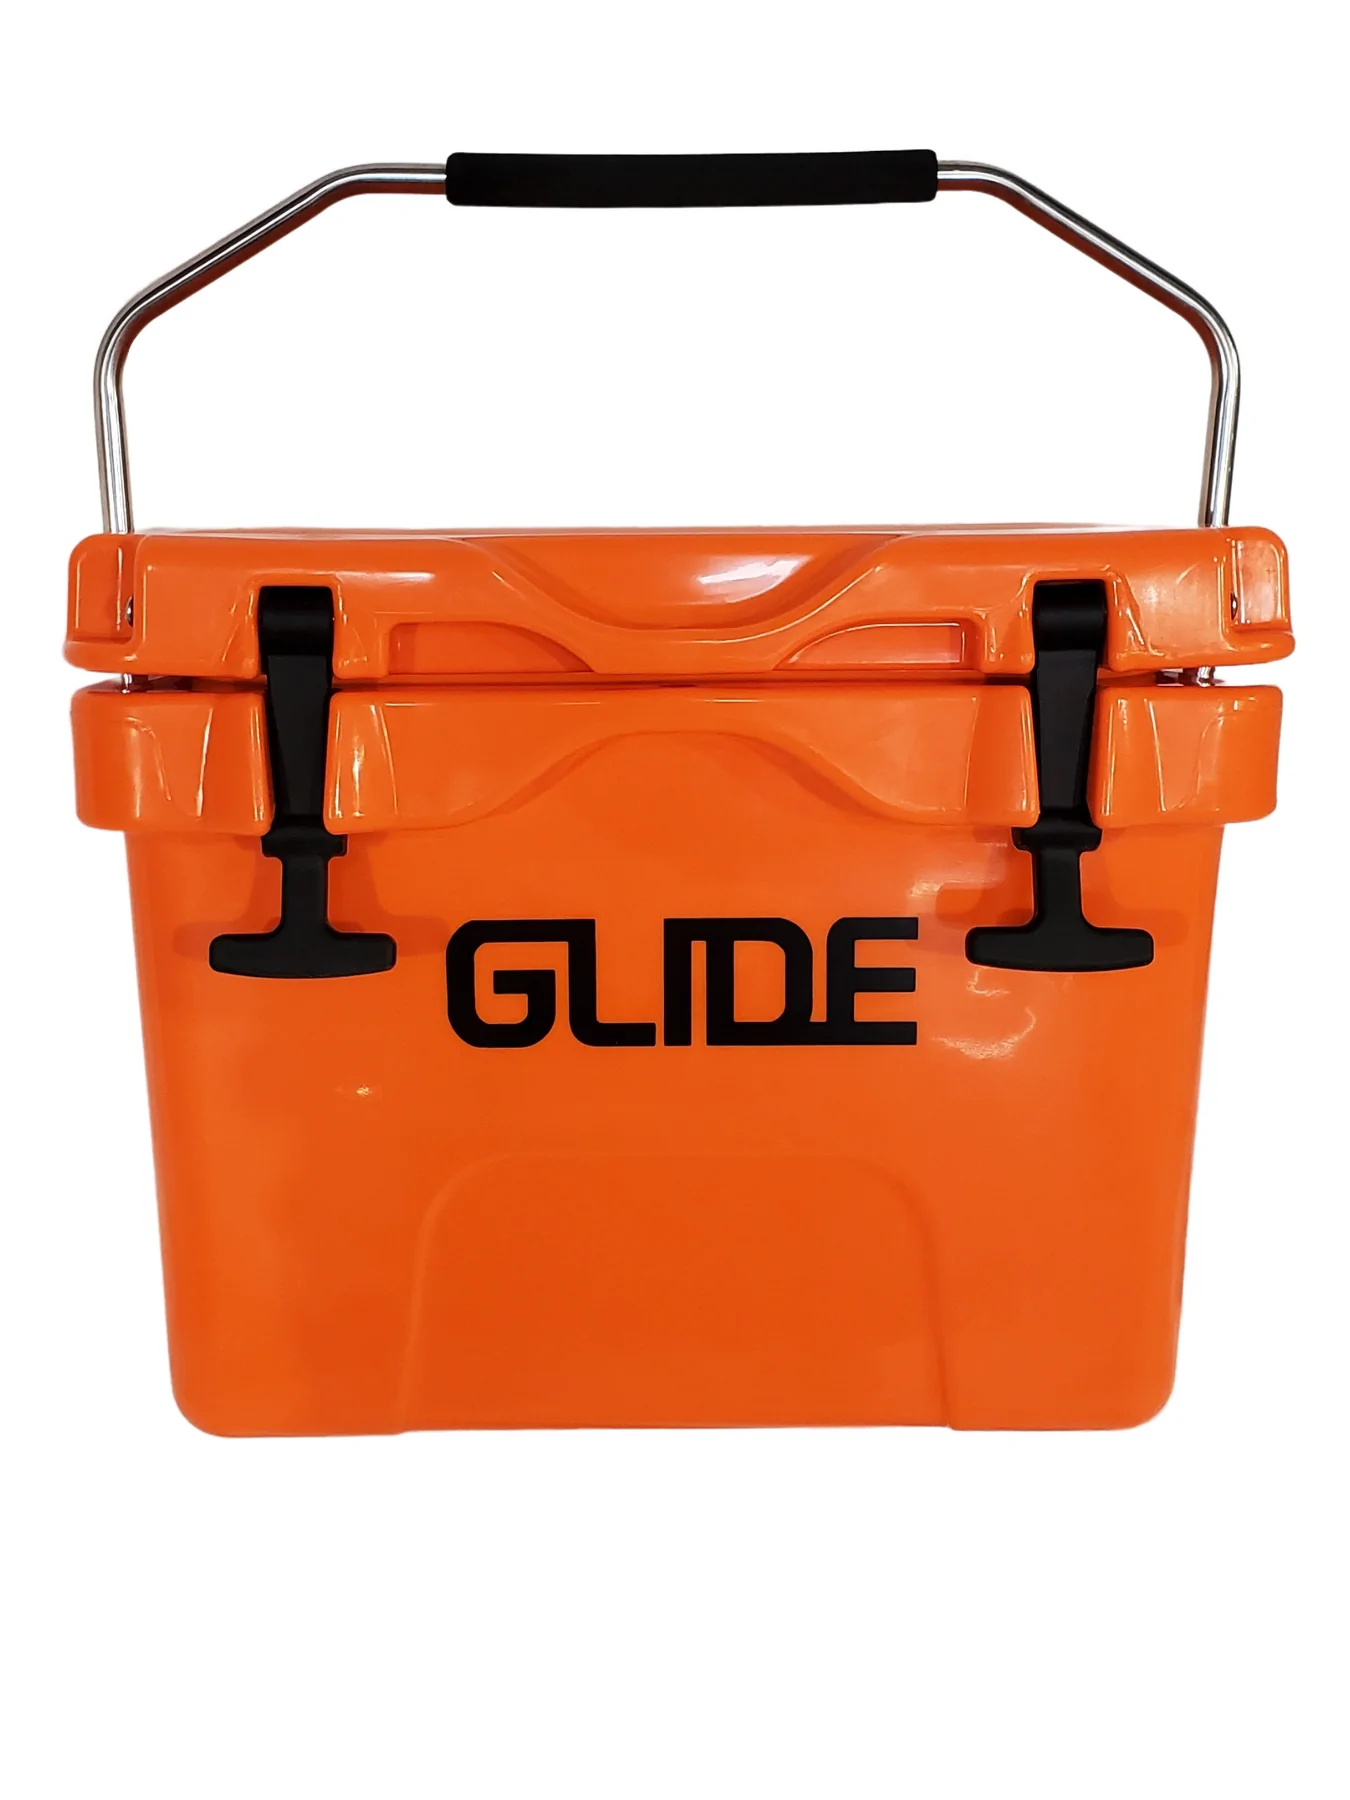 Sup fishing tips include bringing a Glide cooler, ice and rod holder.